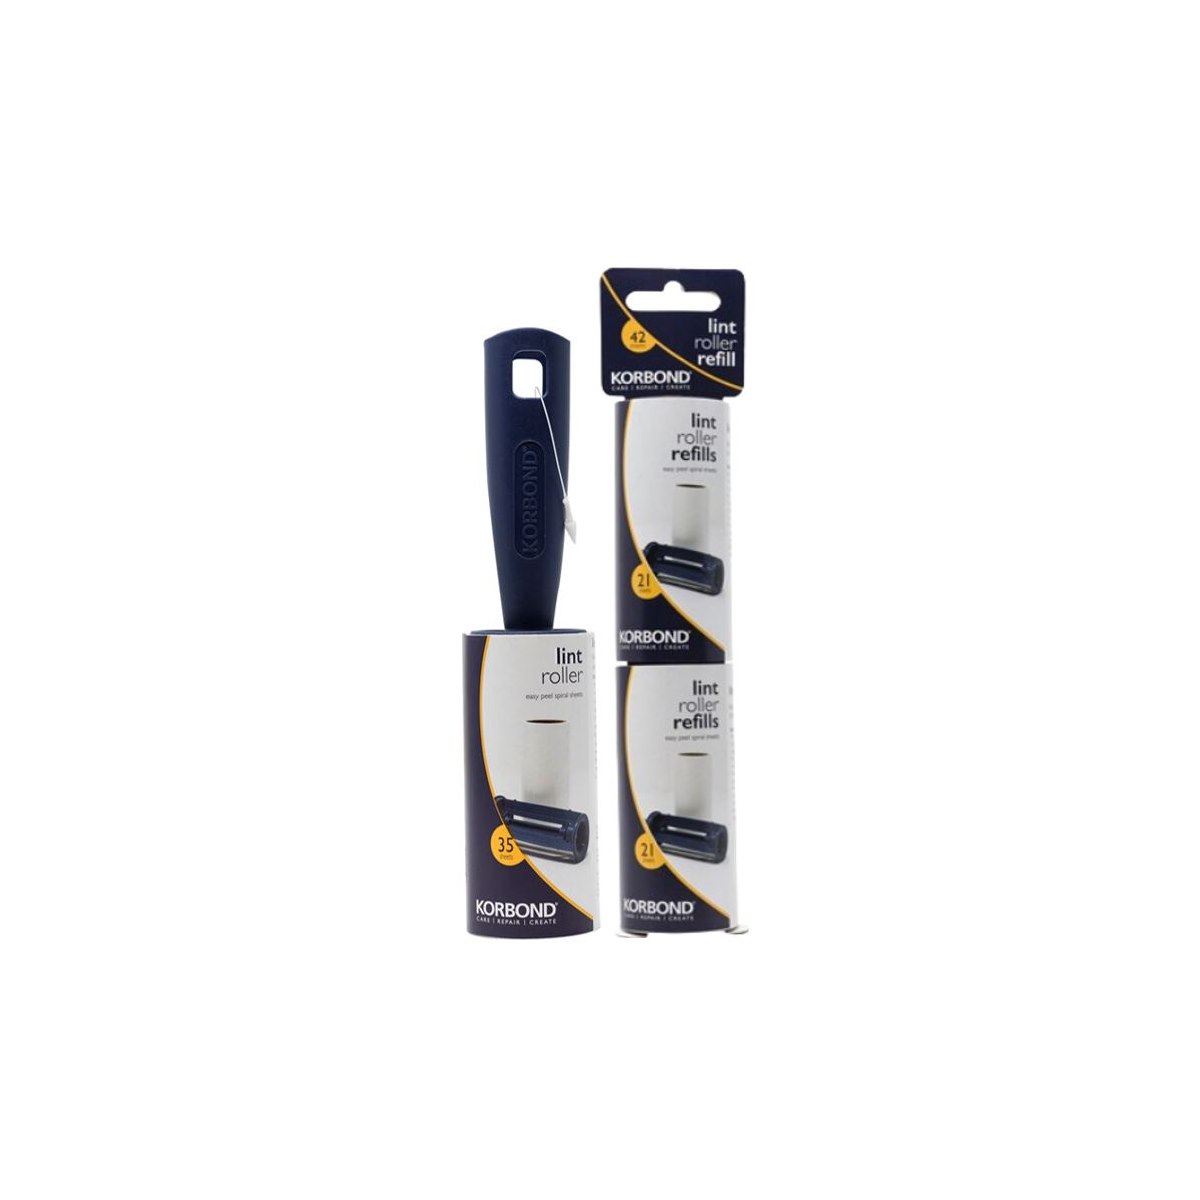 Korbond Lint Roller and Refill Pack